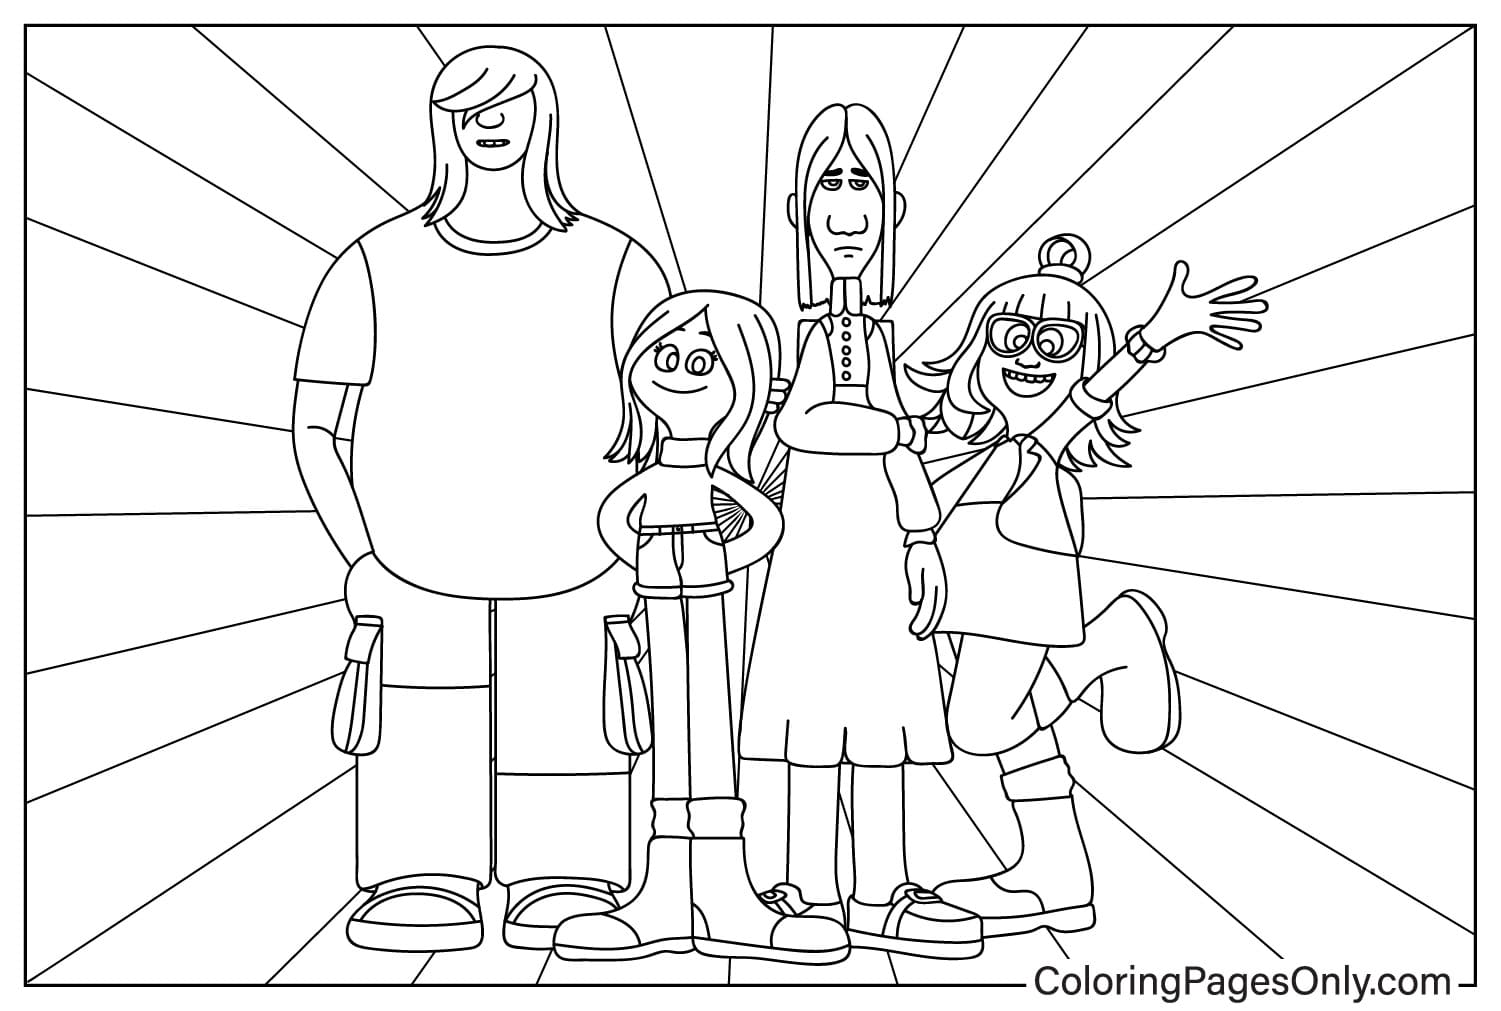 Ruby Gillman Teenage Kraken Coloring Page from Ruby Gillman Teenage Kraken